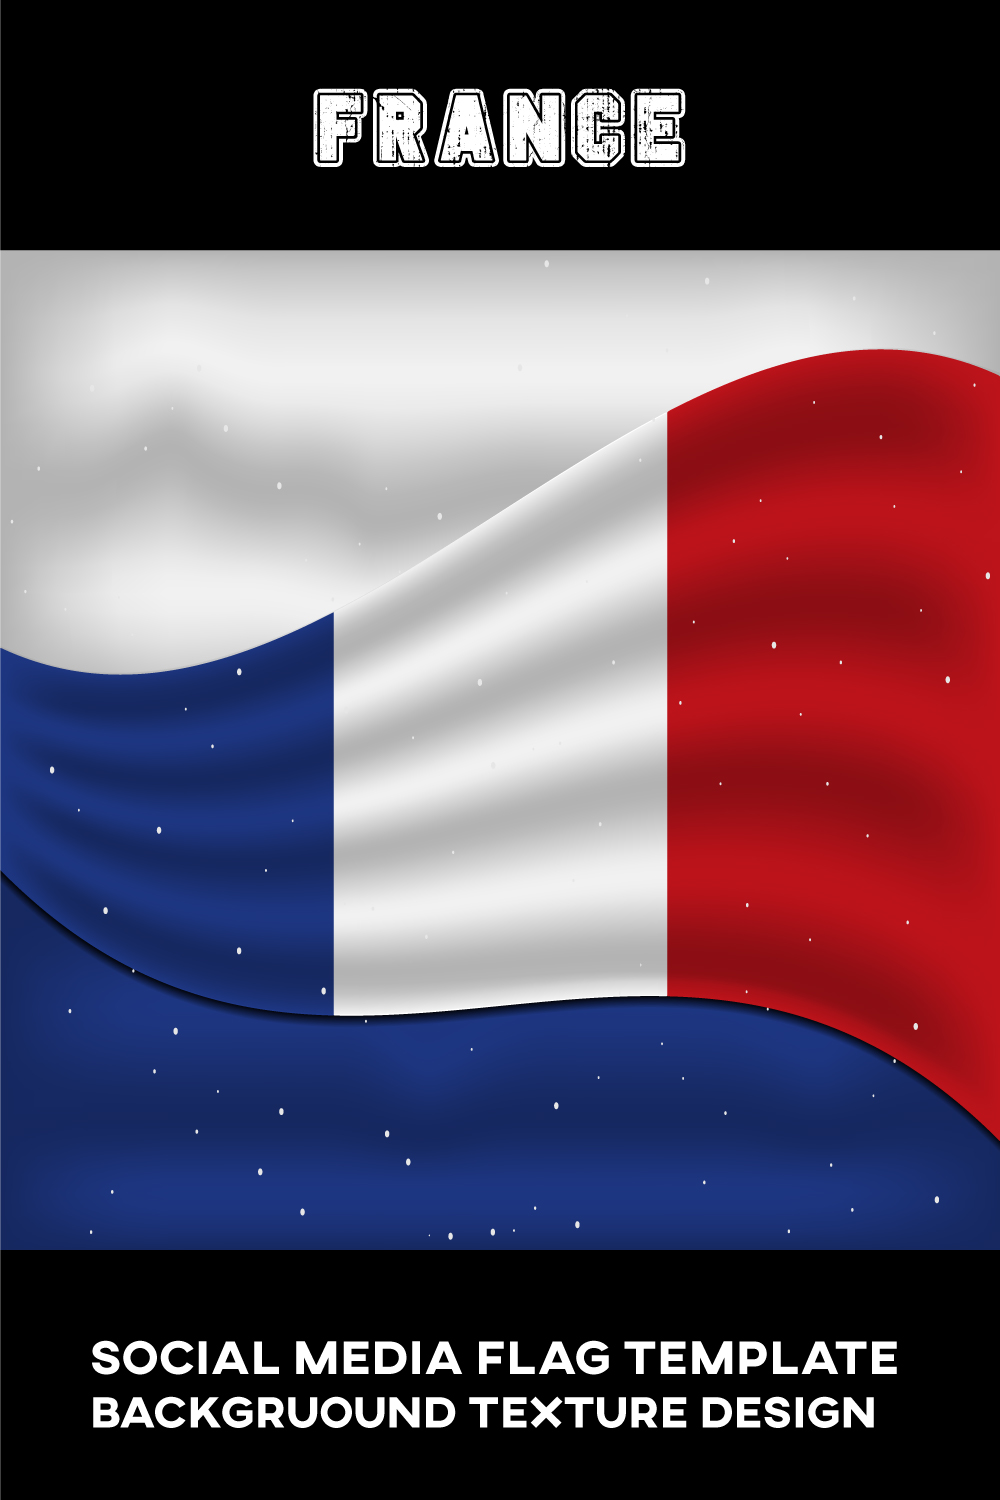 Beautiful image of the flag of France.